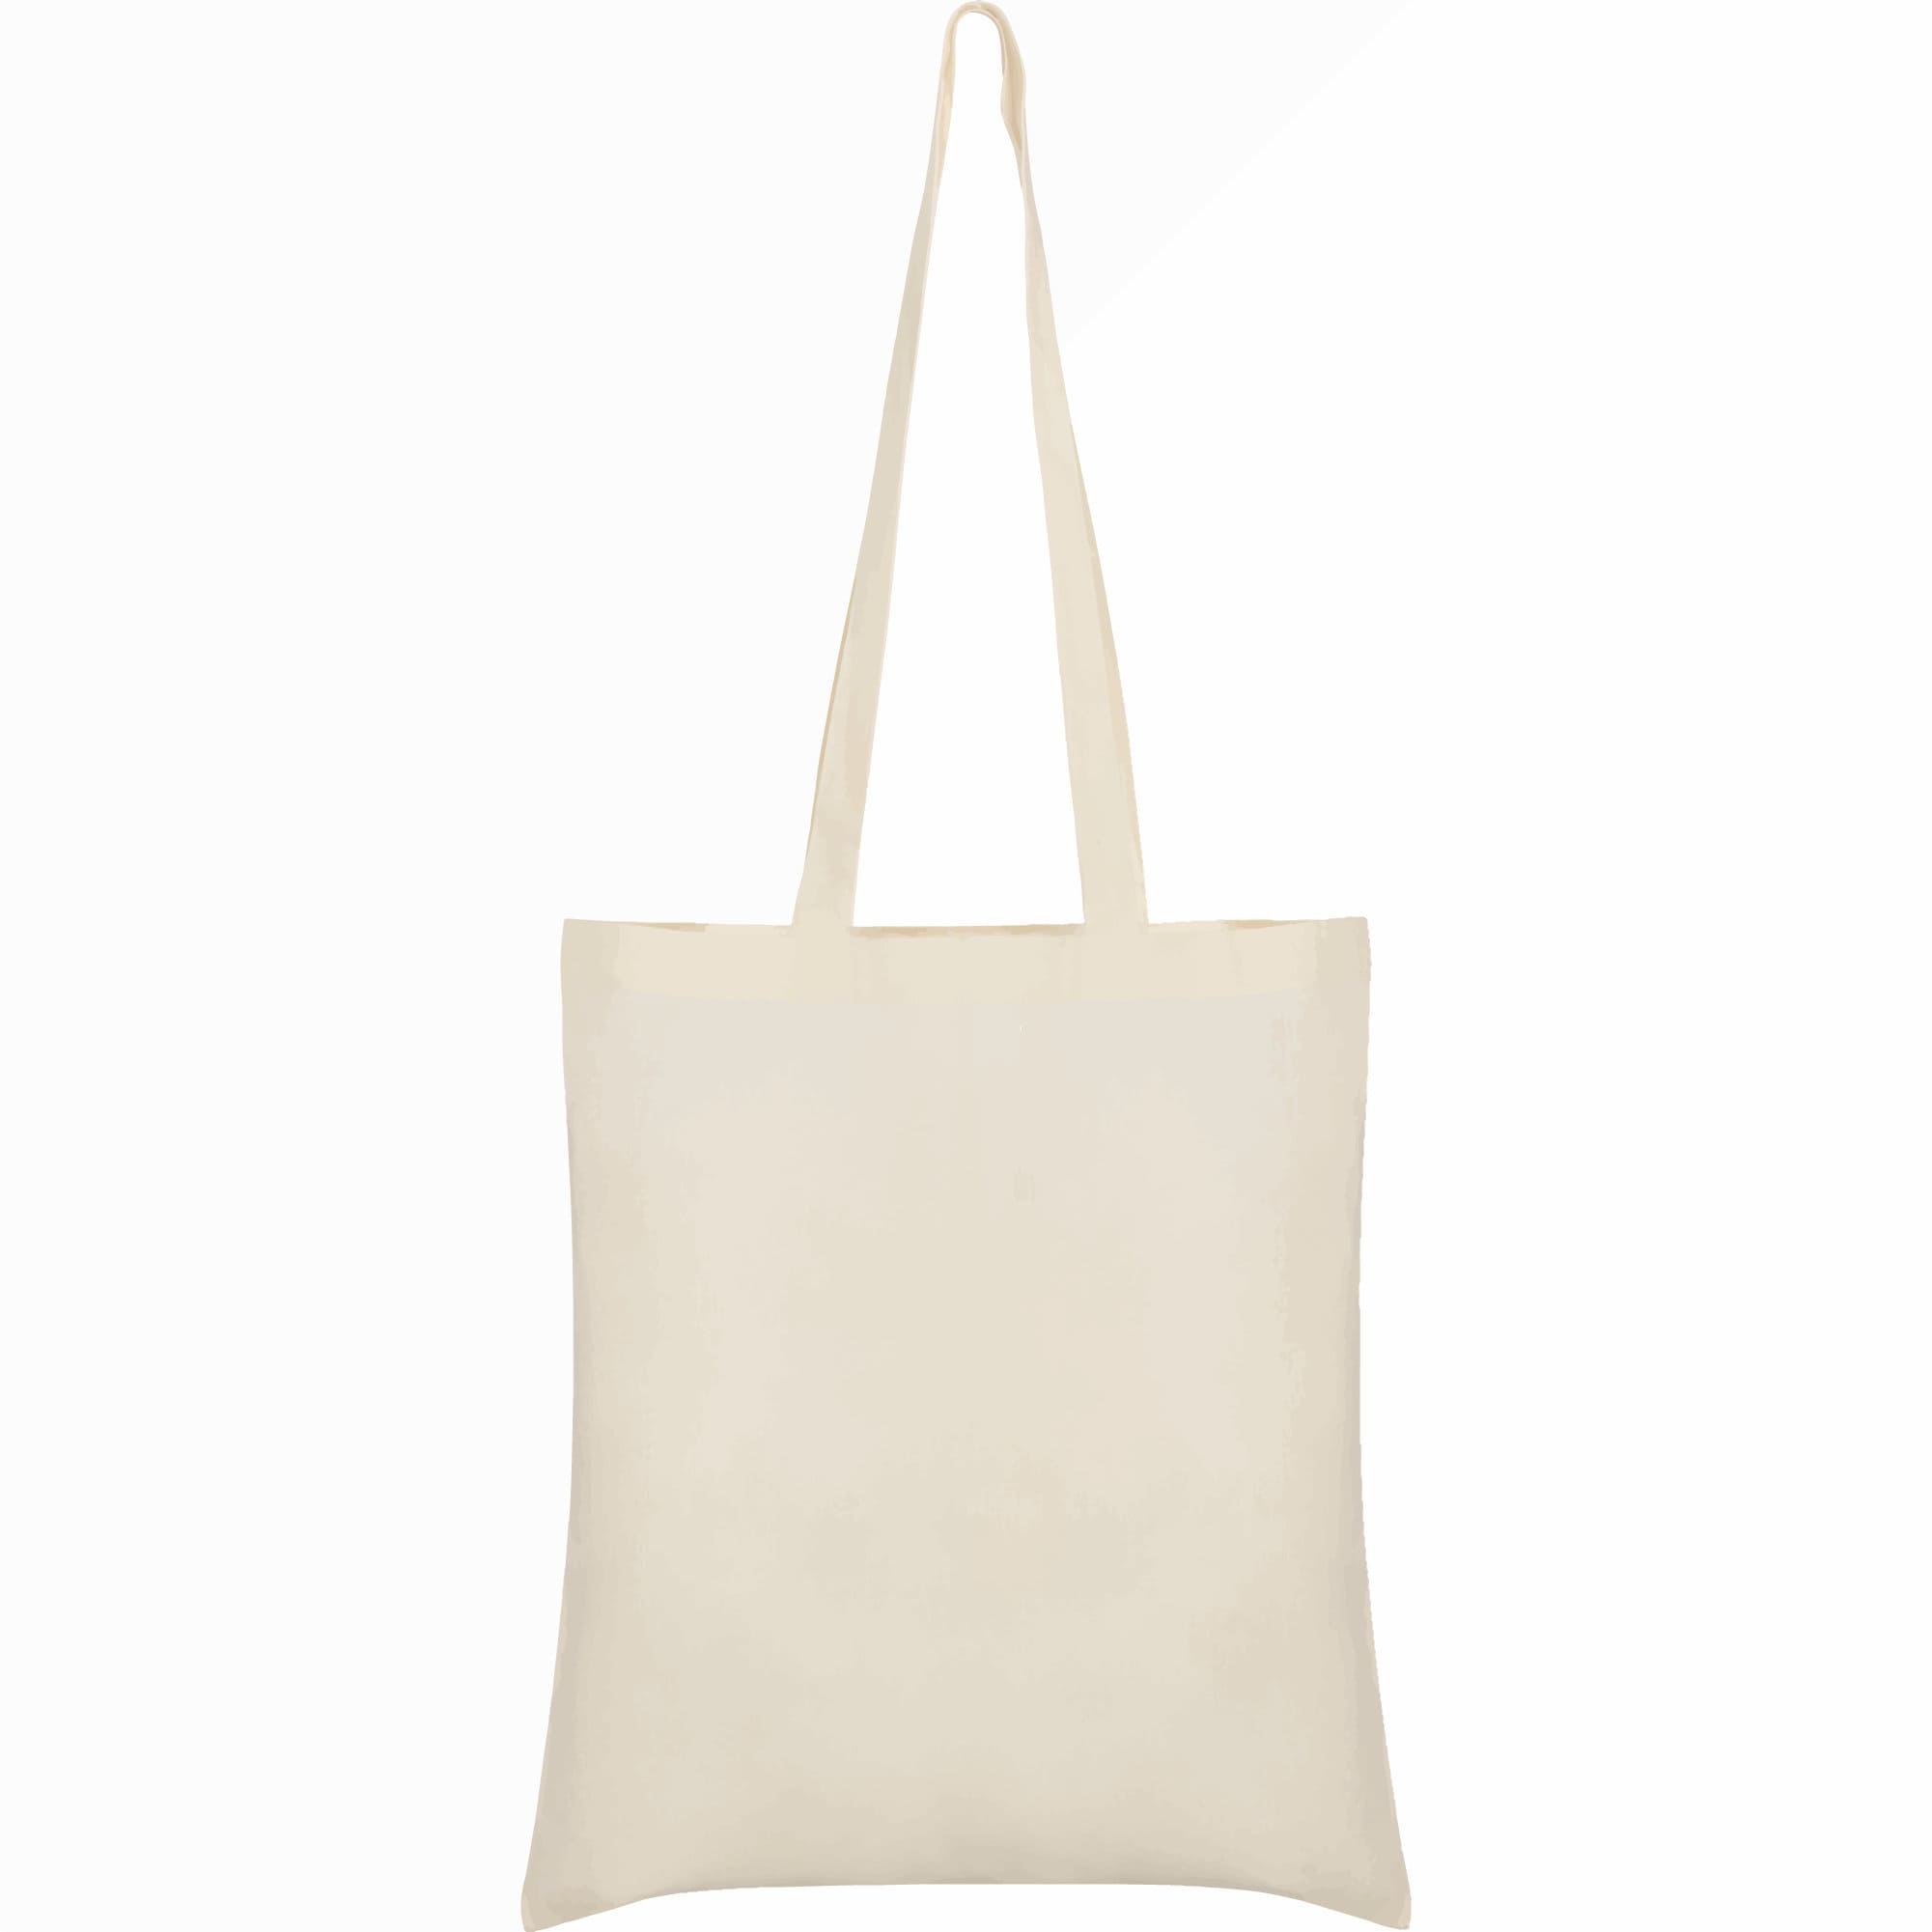 Plain Coloured Cotton Shopping Tote Shoulder Bags Available in 14